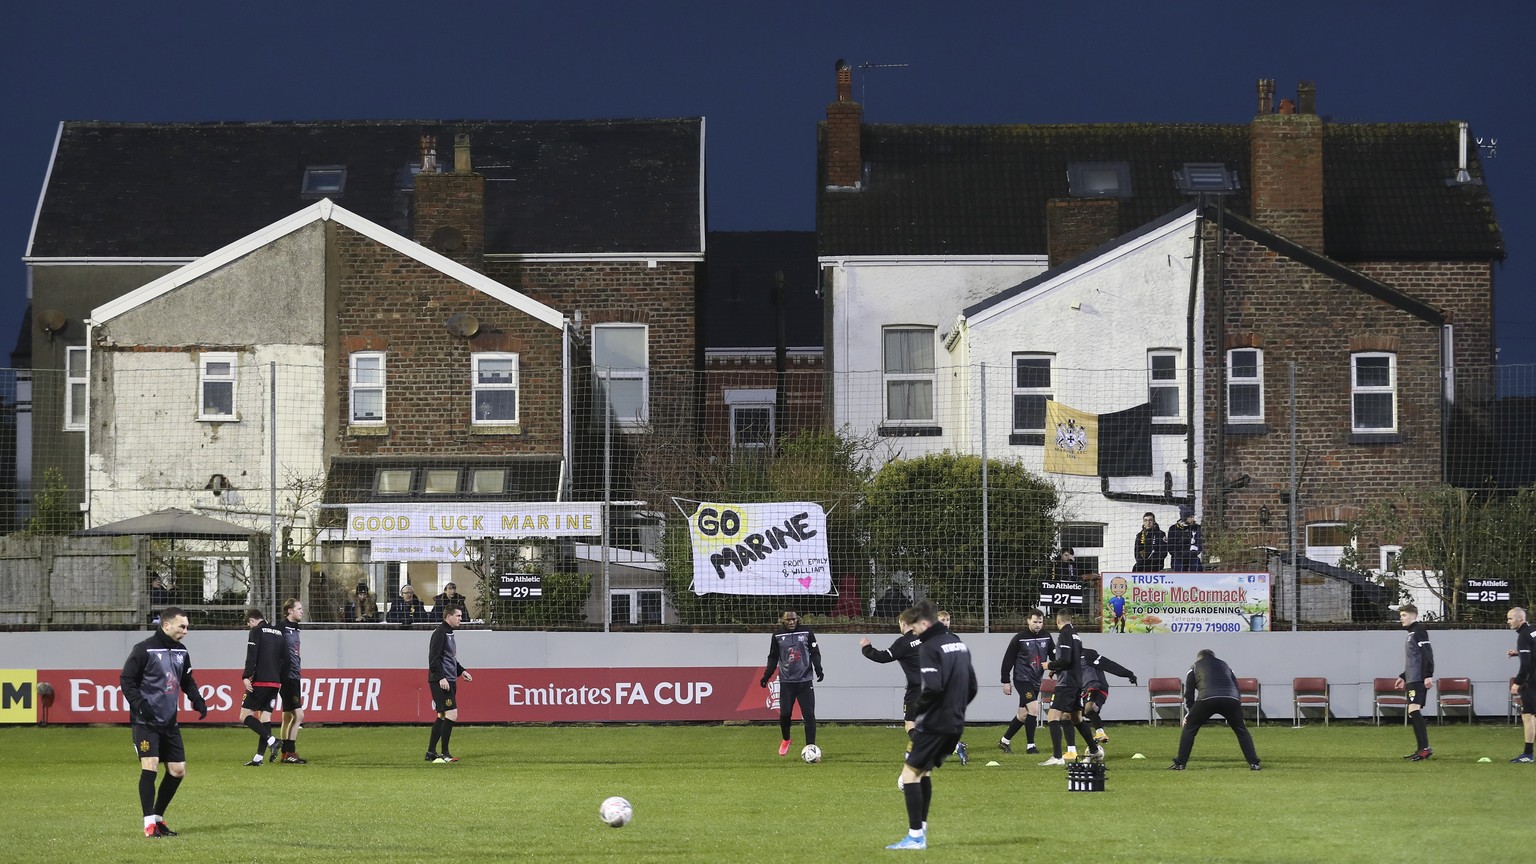 Marine players warm up prior to the English FA Cup third round soccer match between Marine and Tottenham Hotspur at Rossett Park stadium in Crosby, Liverpool, Sunday, Jan. 10, 2021. (Martin Rickett/Po ...